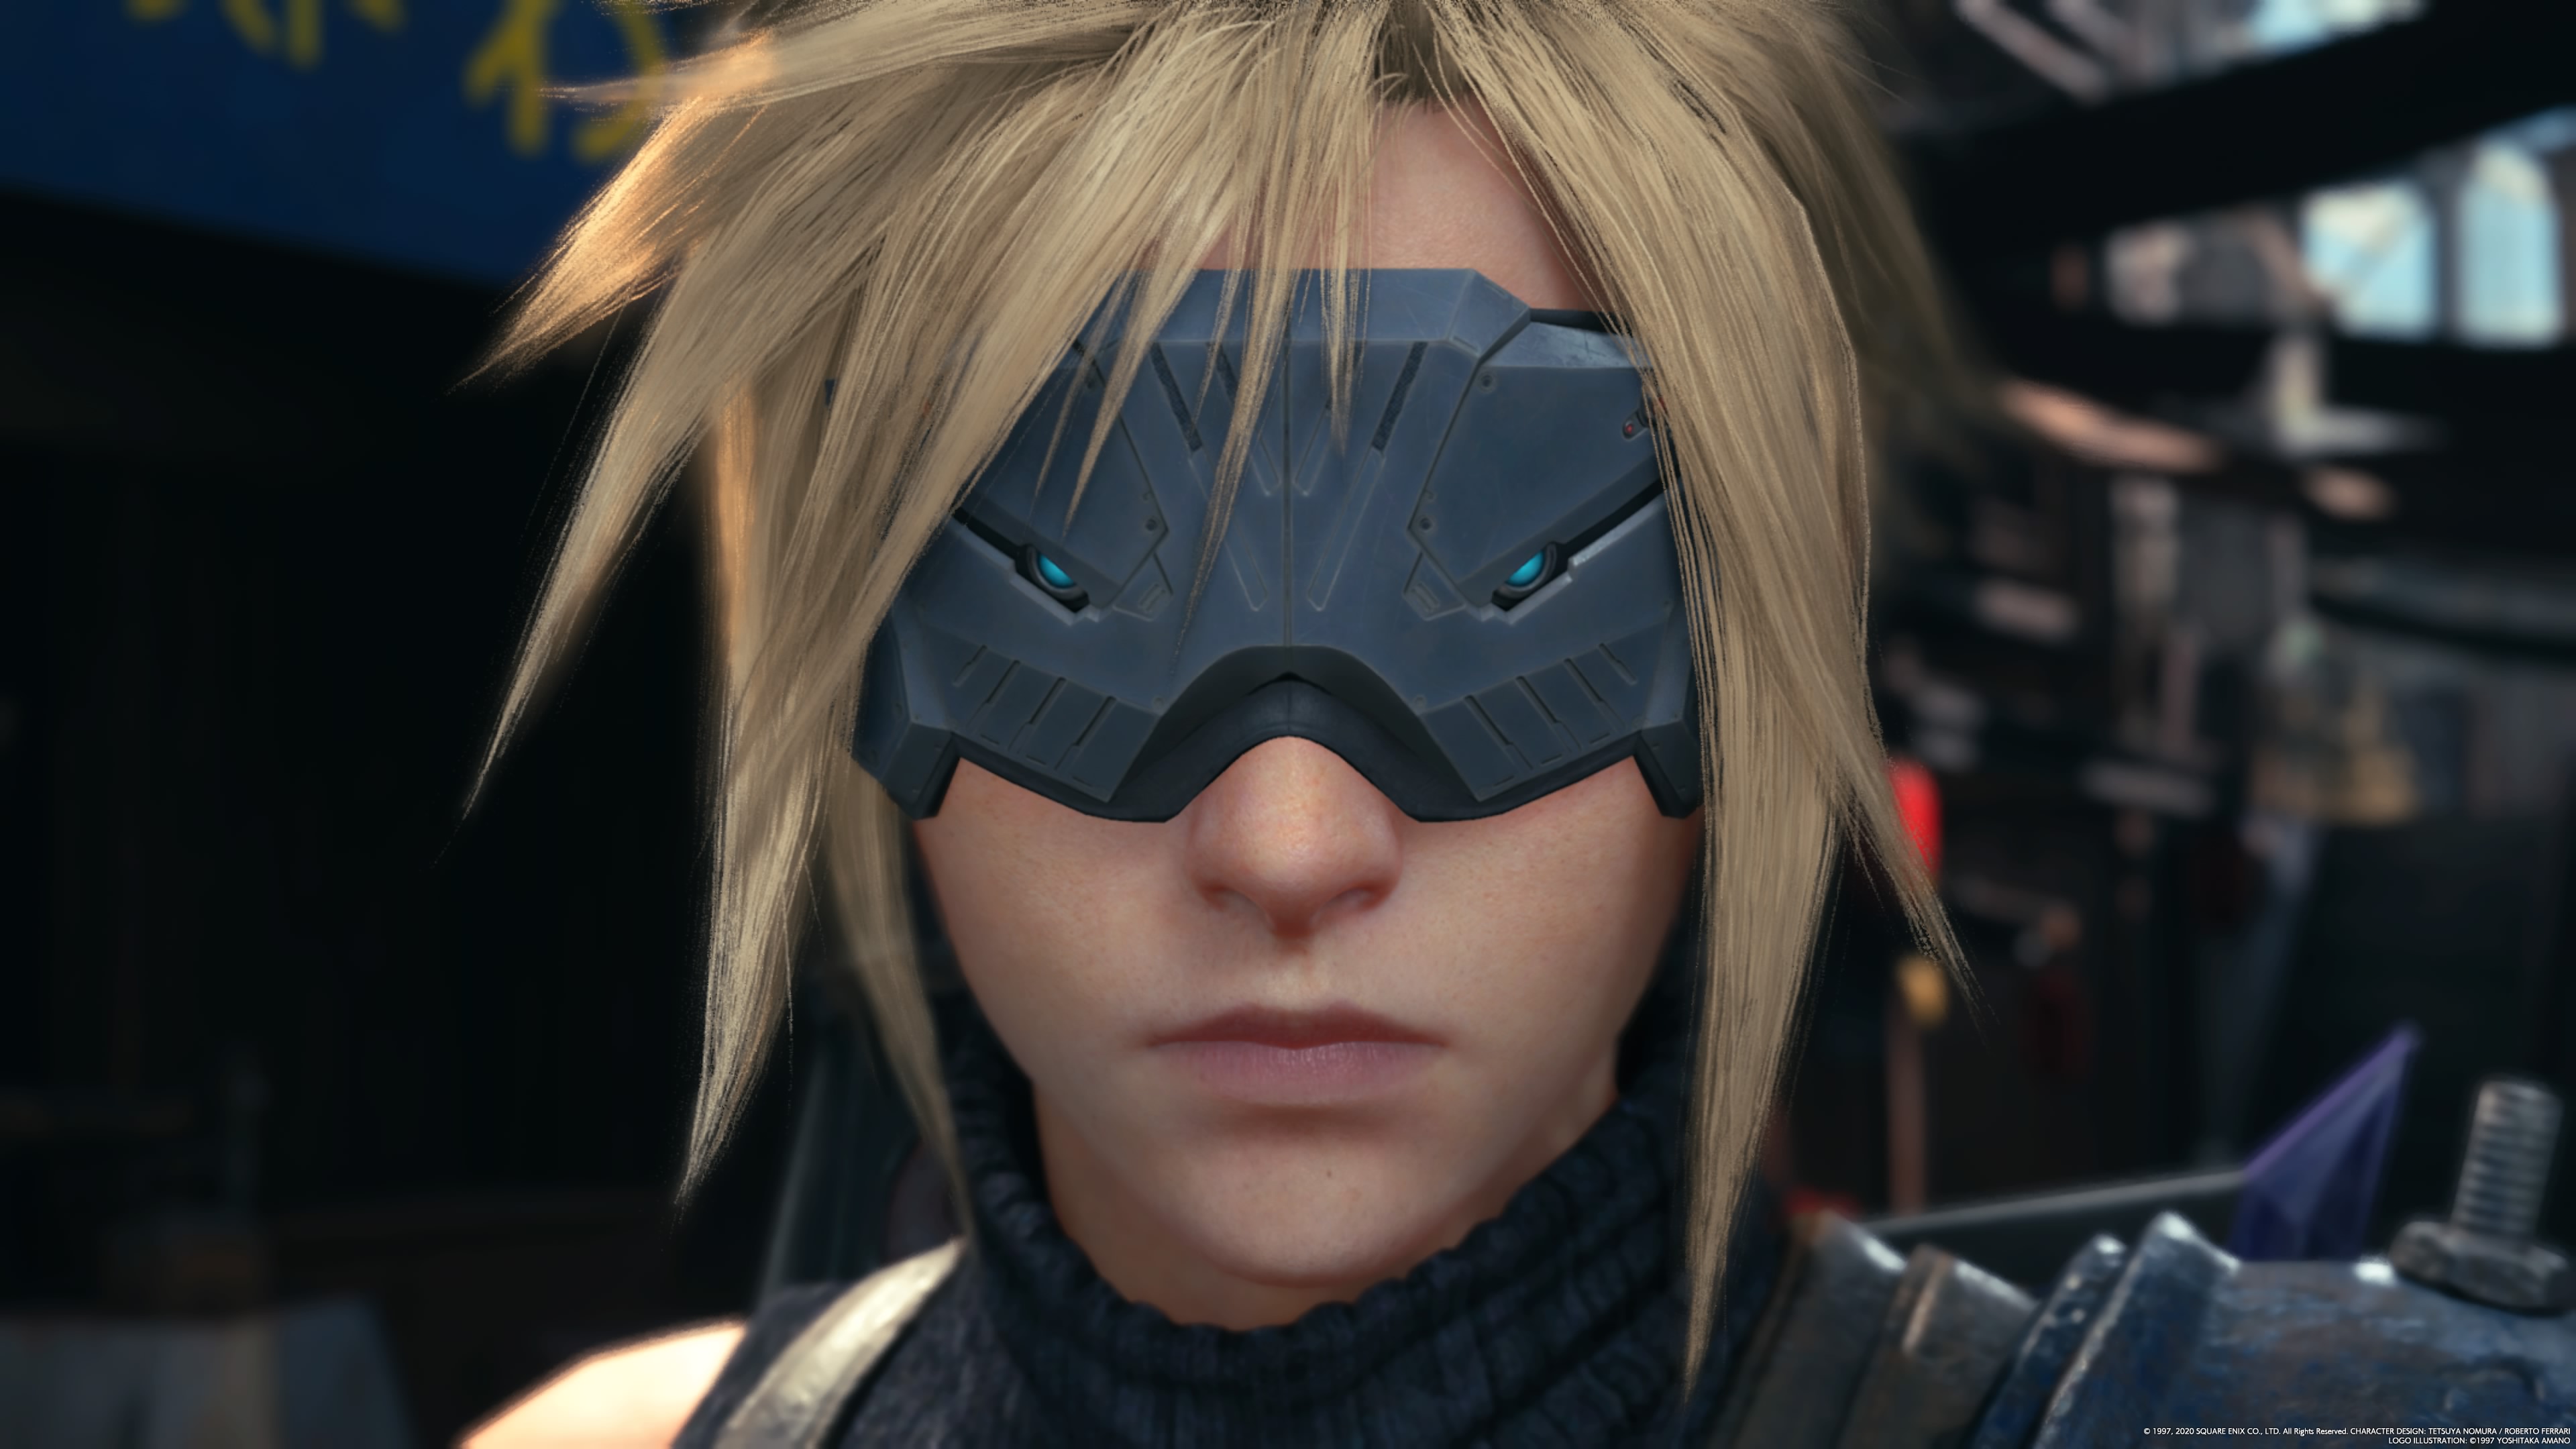 Cloud from the Final Fantasy 7 Remake wearing VR googles